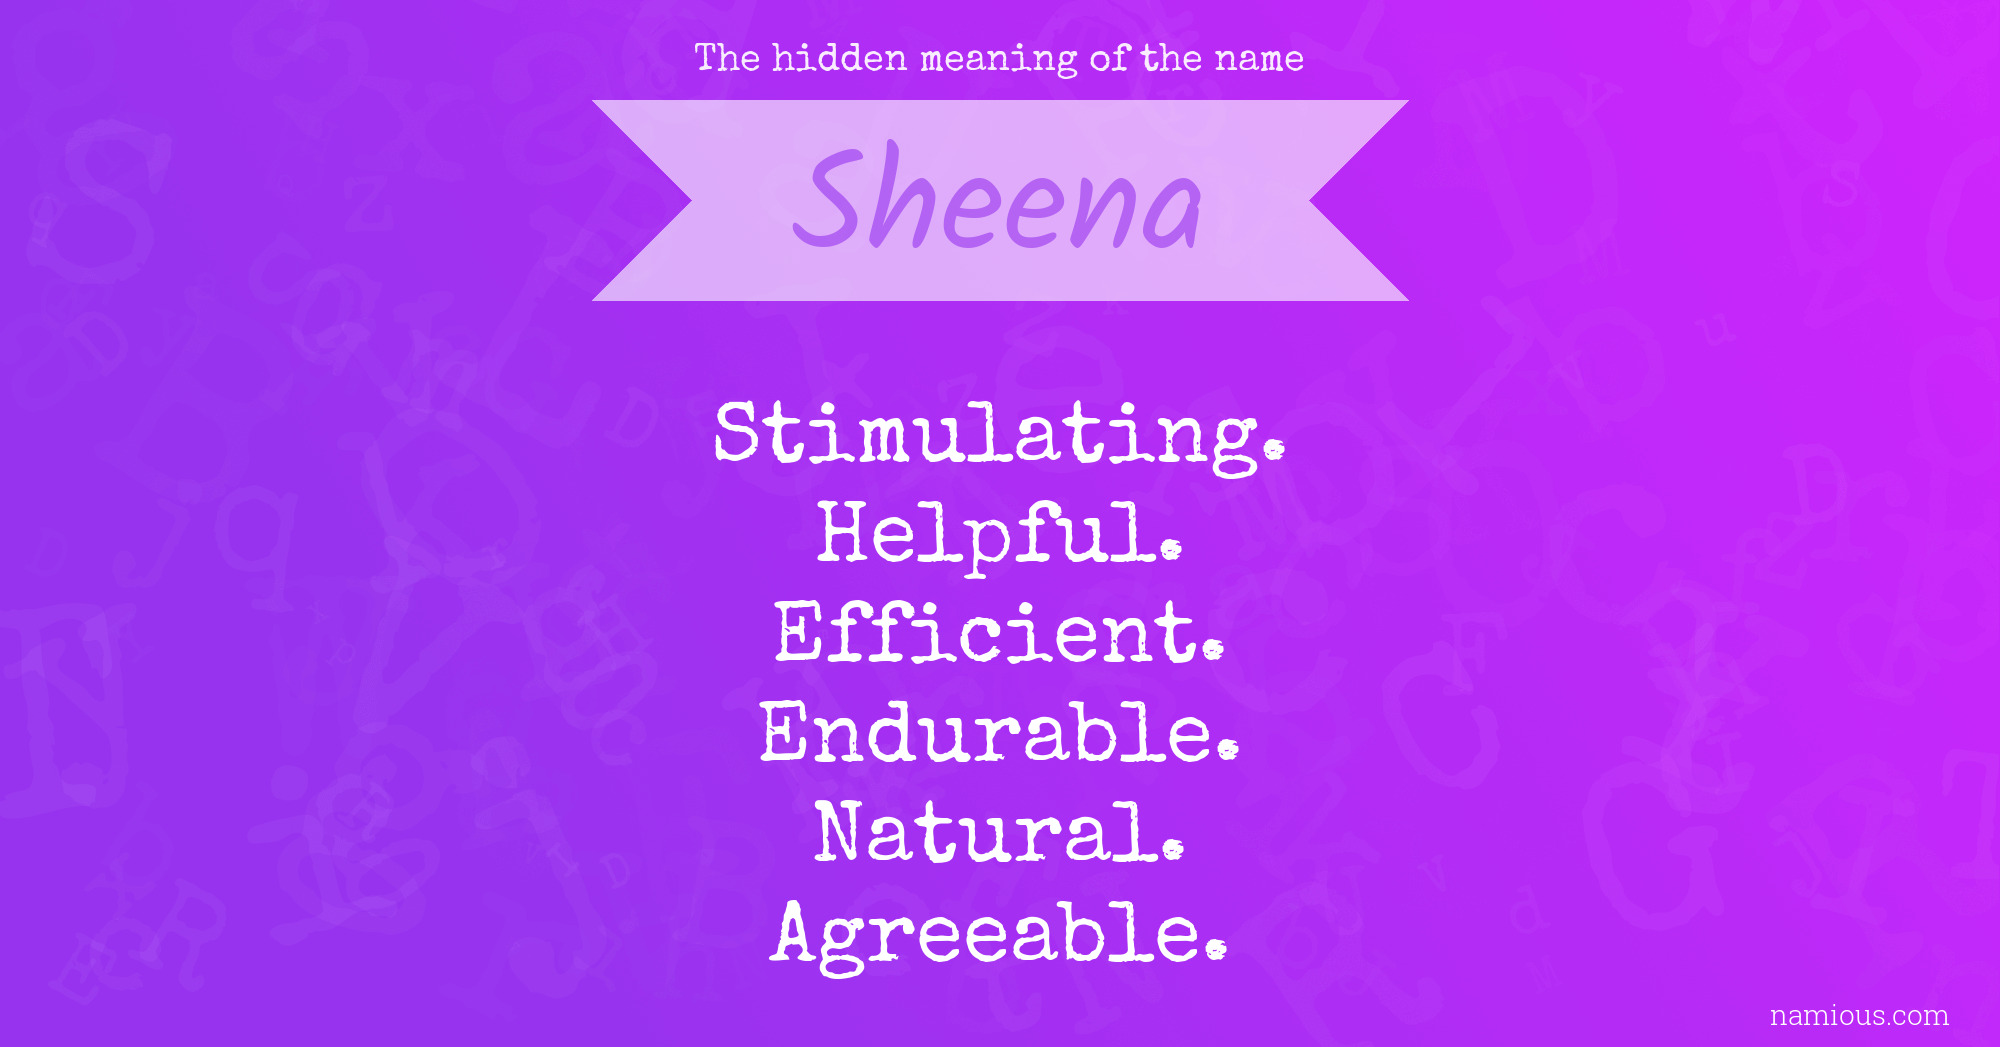 The hidden meaning of the name Sheena